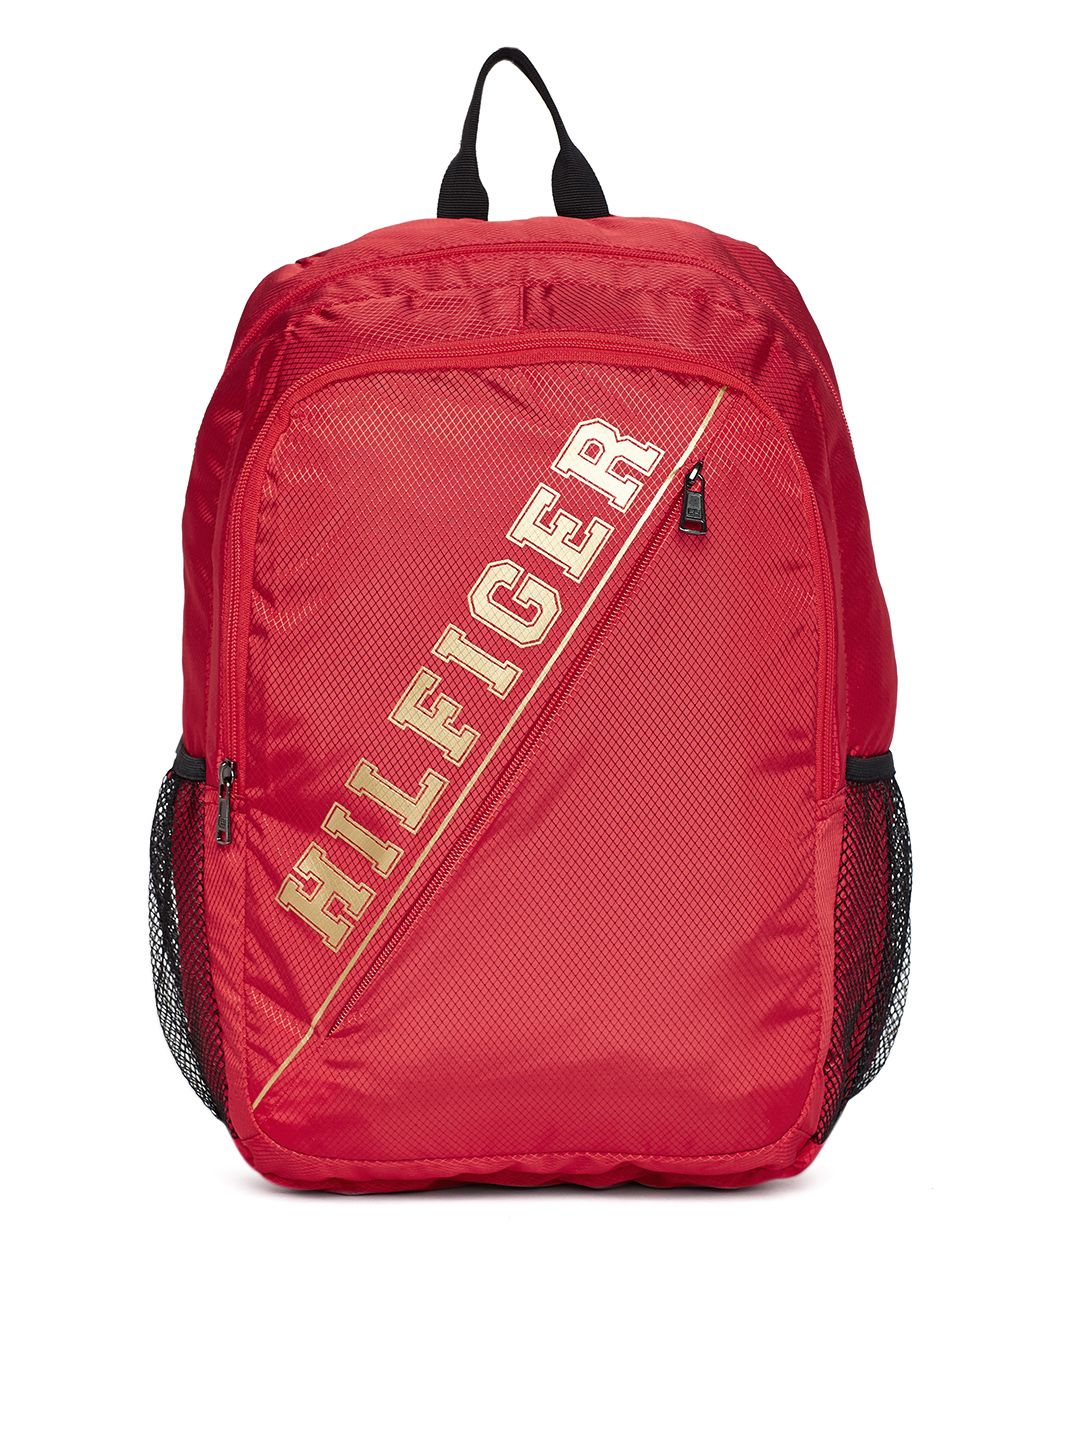 Tommy Hilfiger Unisex Red Brand Logo laptop Backpack Price in India